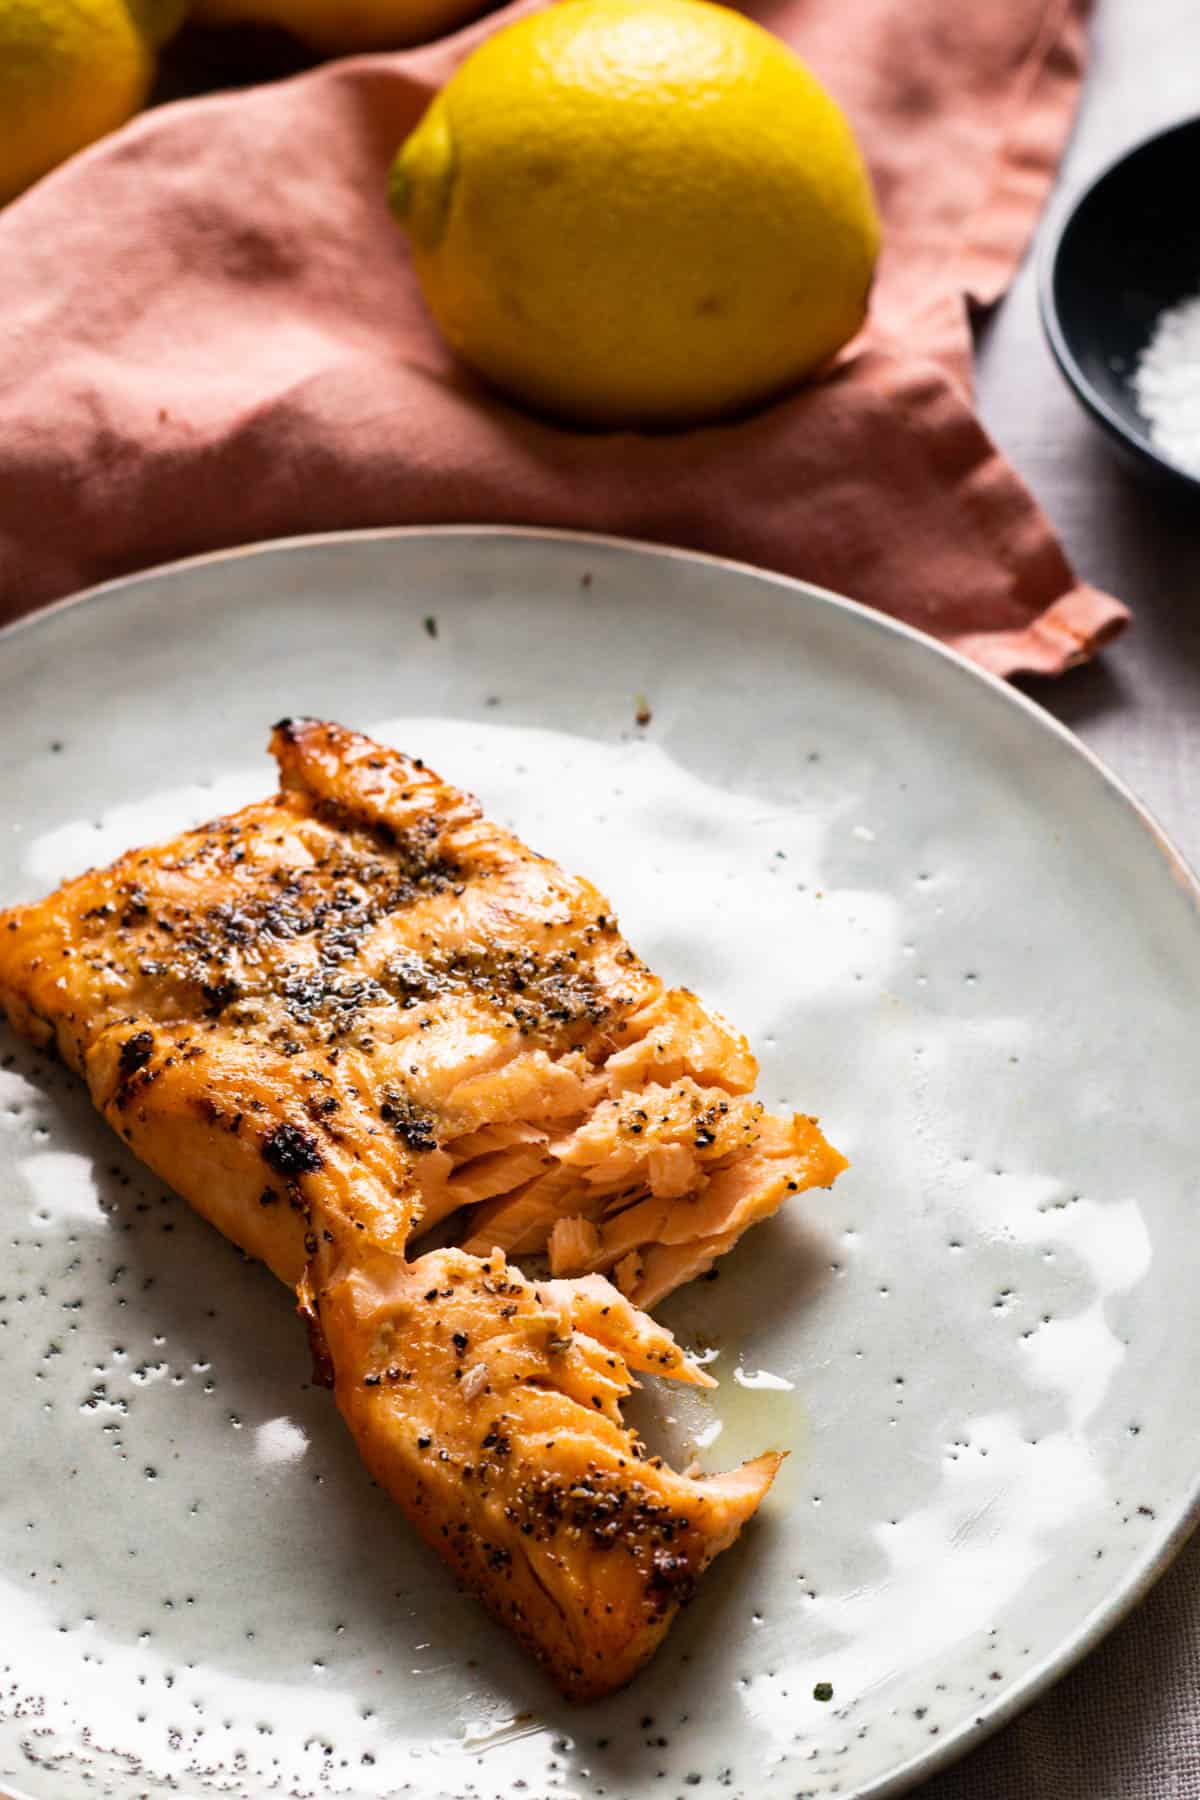 Cooked salmon on a blue plate.